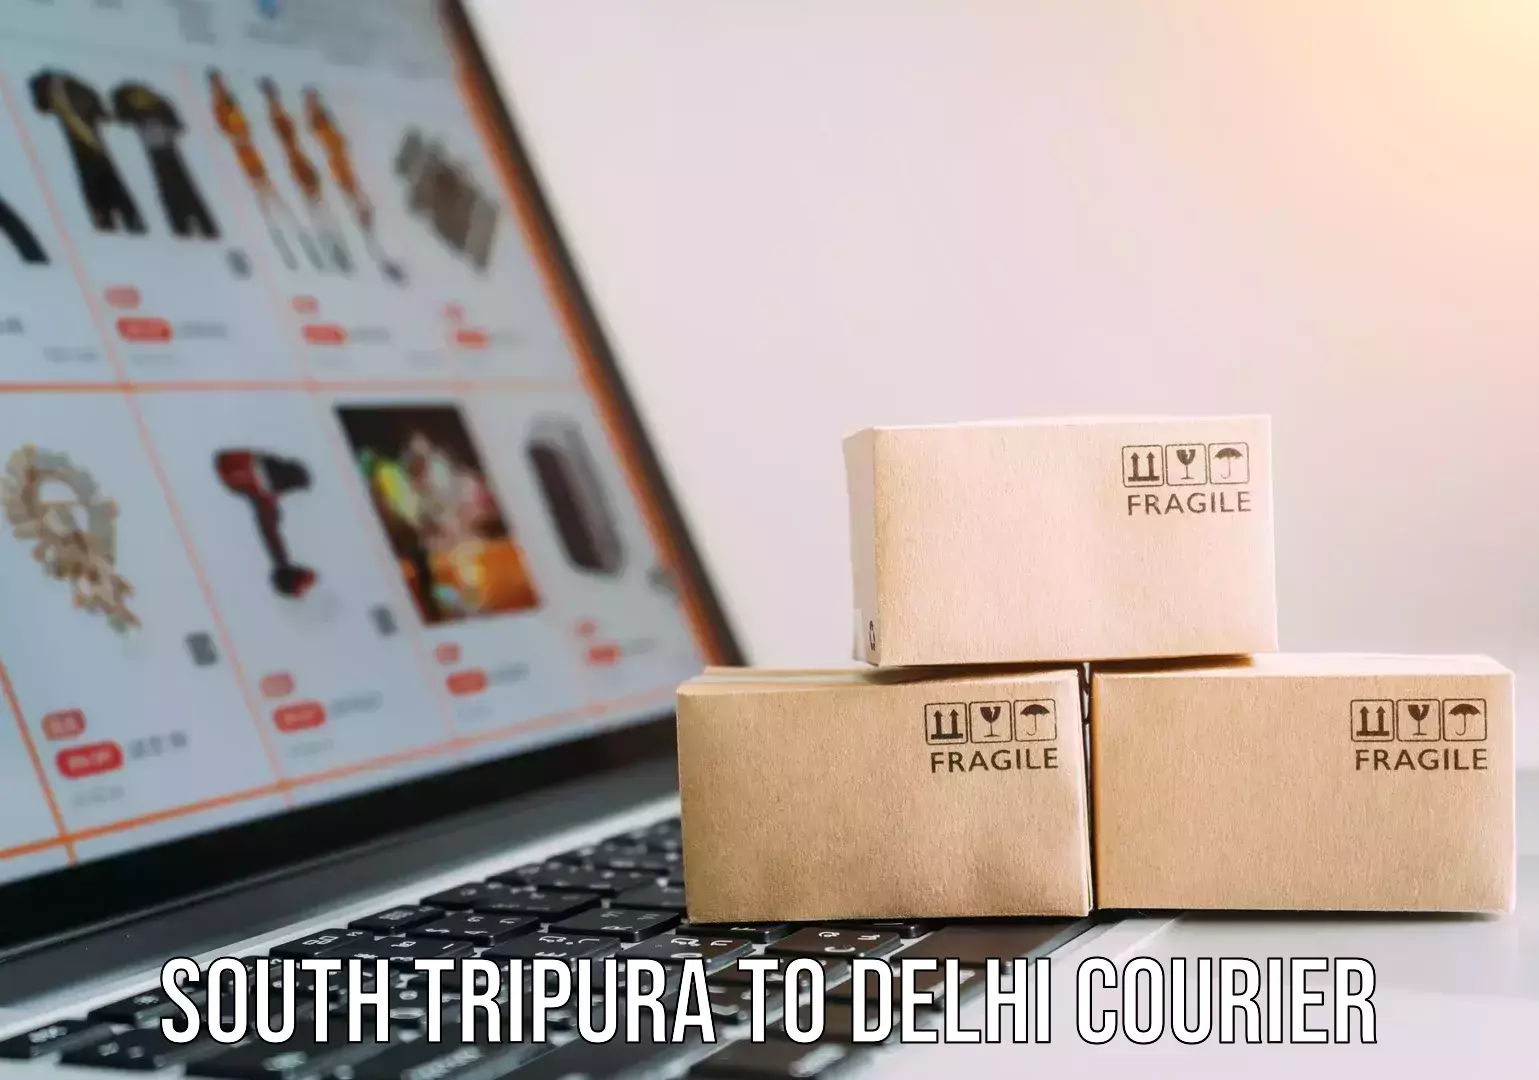 Small business couriers South Tripura to Delhi